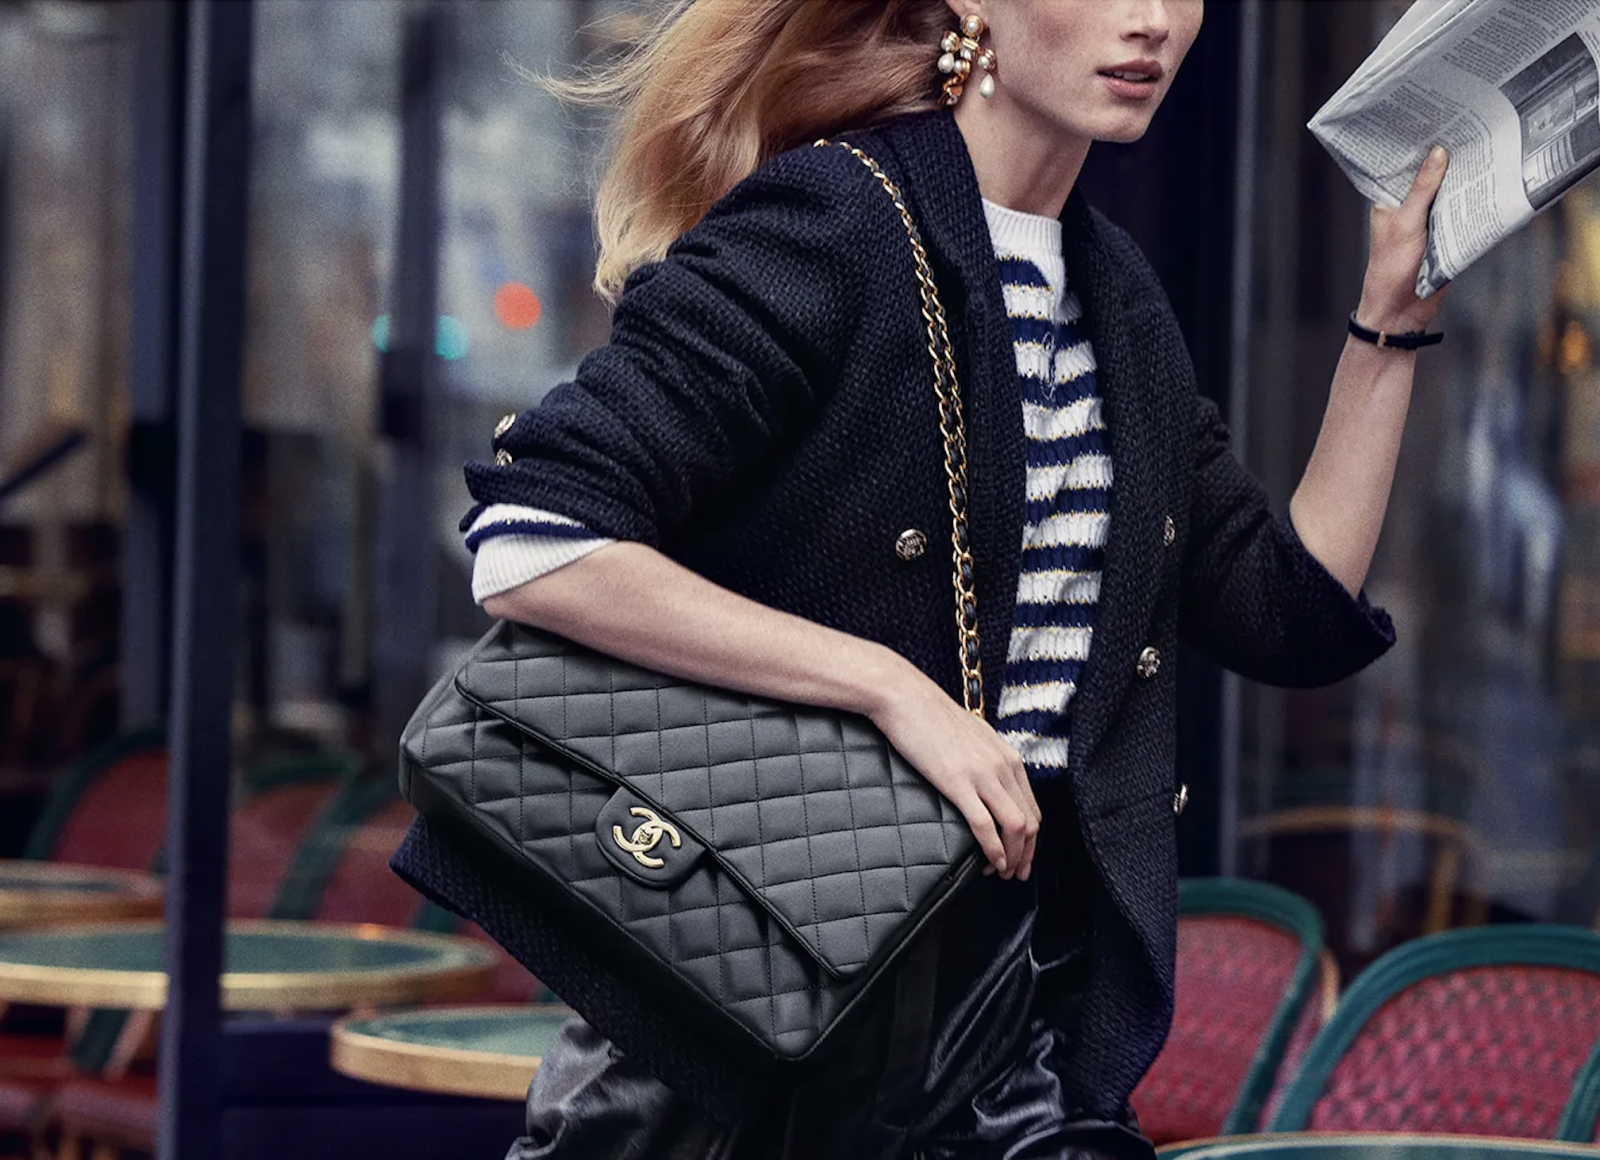 Alert: Chanel To Increase Prices in the United States - PurseBop